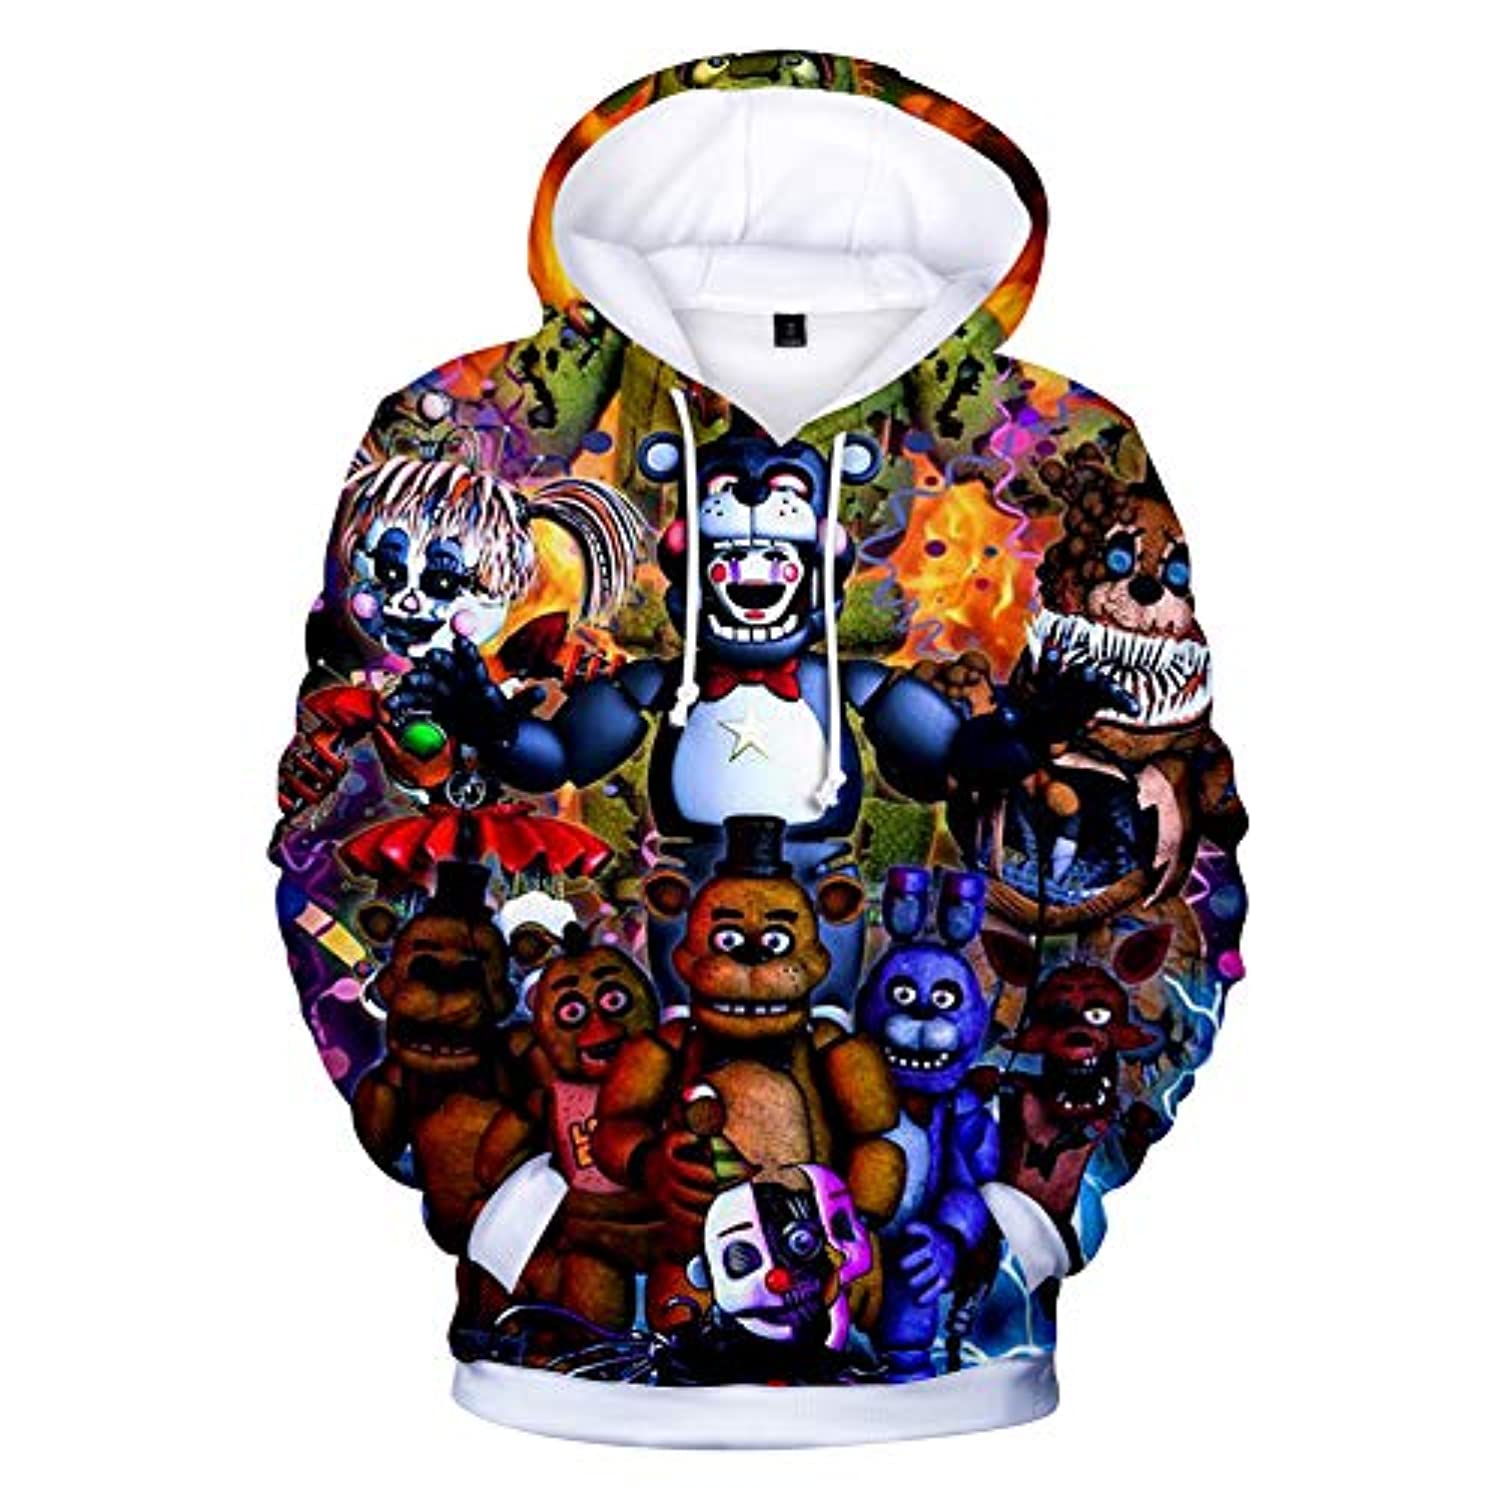 FNAF Anime Character Hoodie Boys Girls Fashion tops Children's Clothes 3-12  Years Toddler Child leisure Student spring Coat